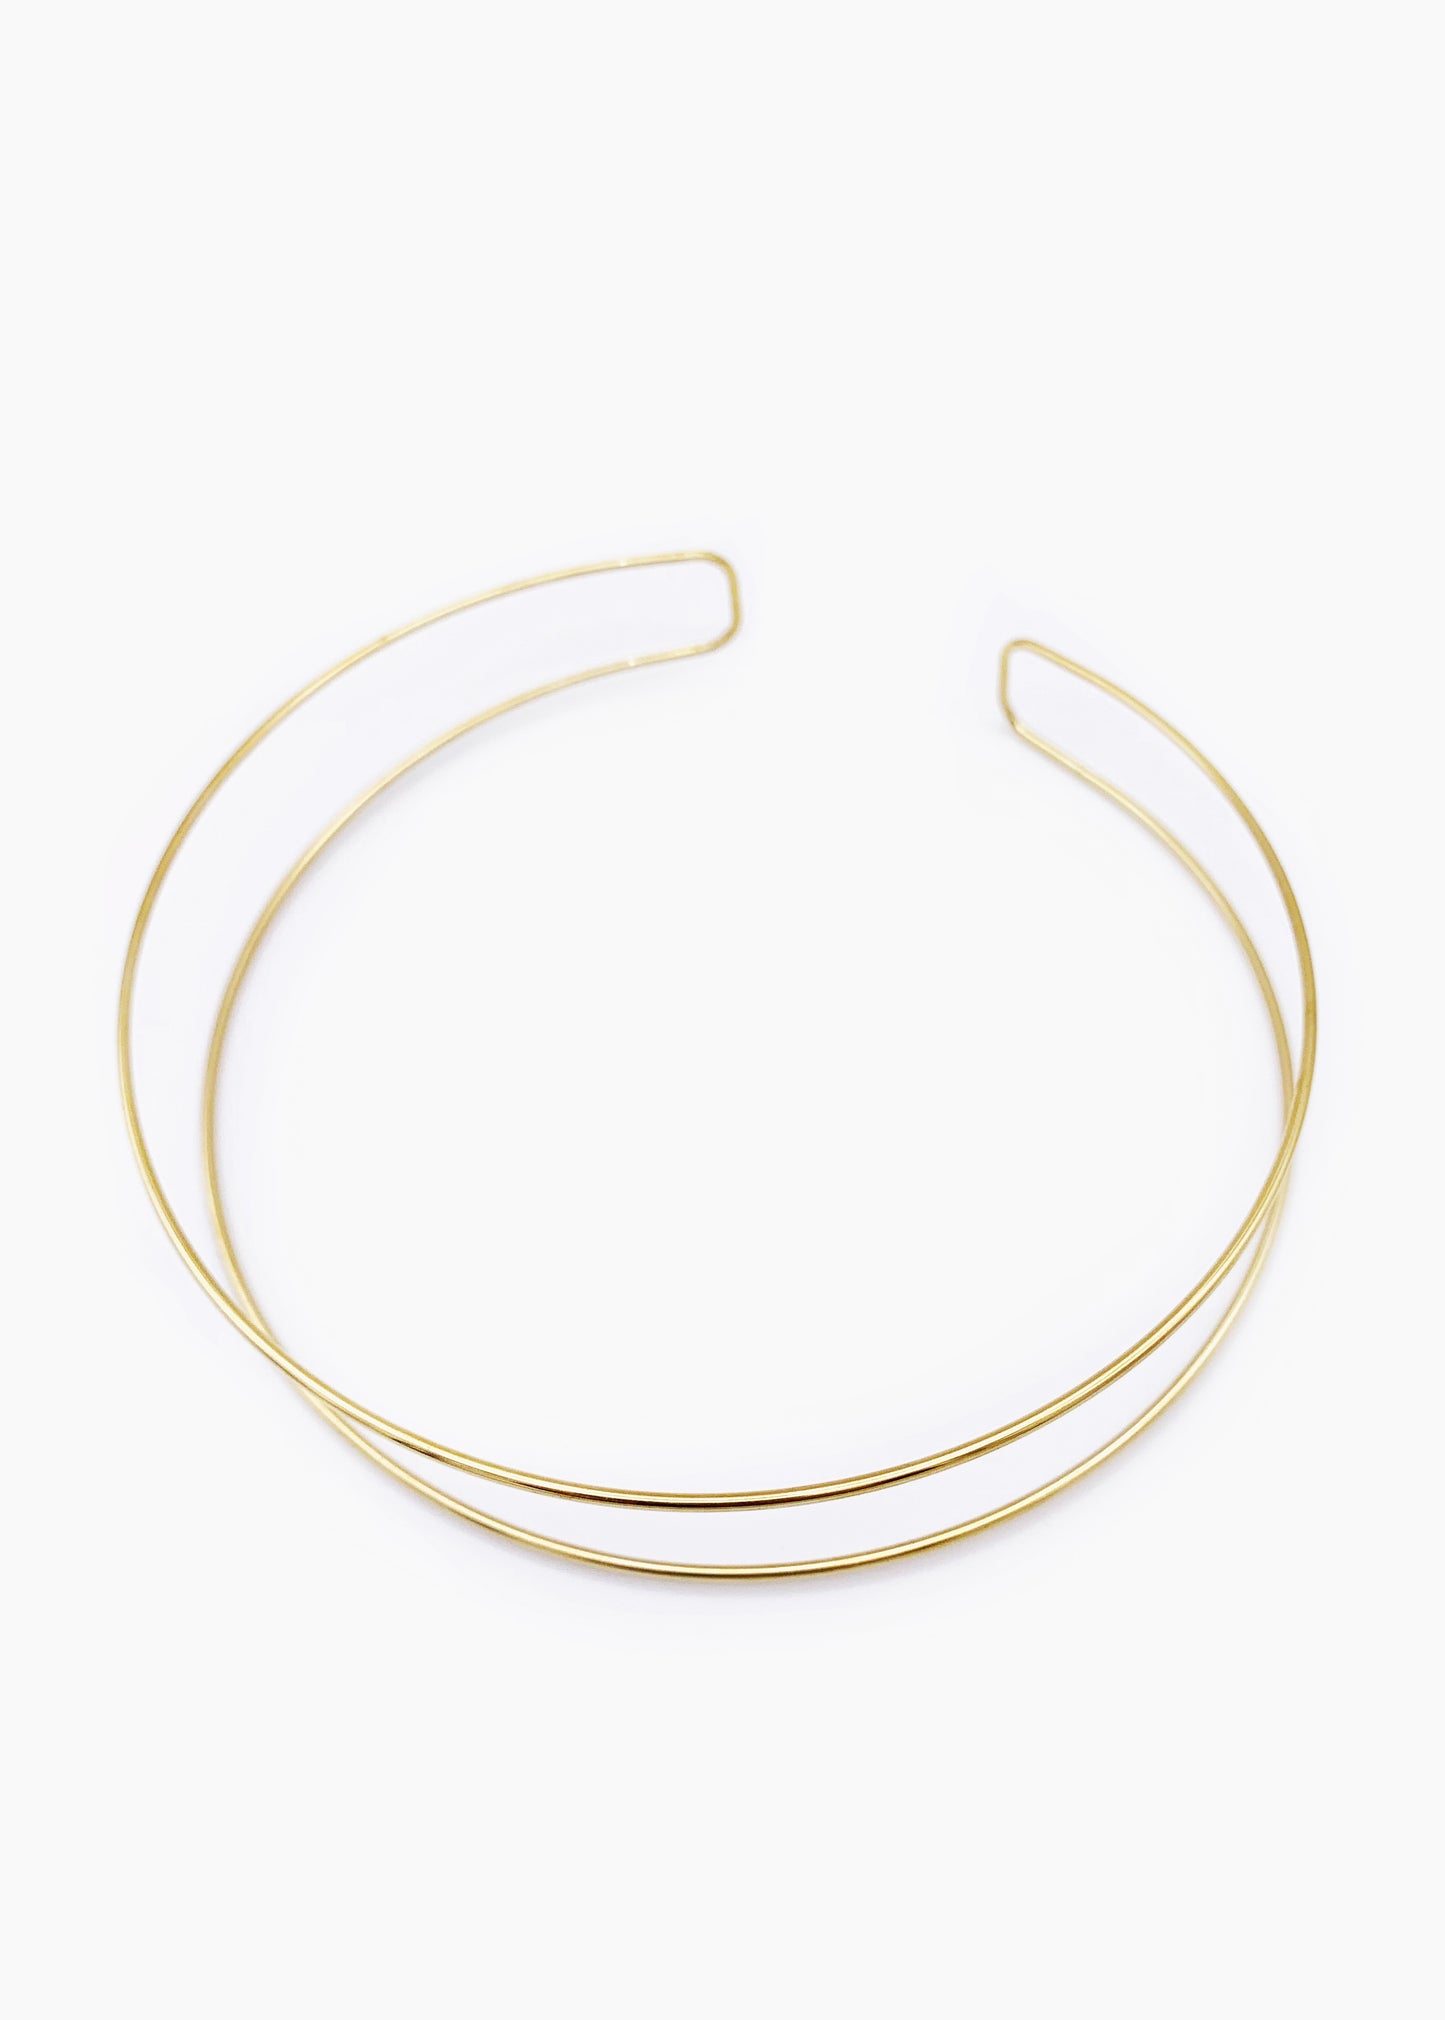 DOBLE RIGID CHOKER NECKLACE STEEL GOLD PLATED